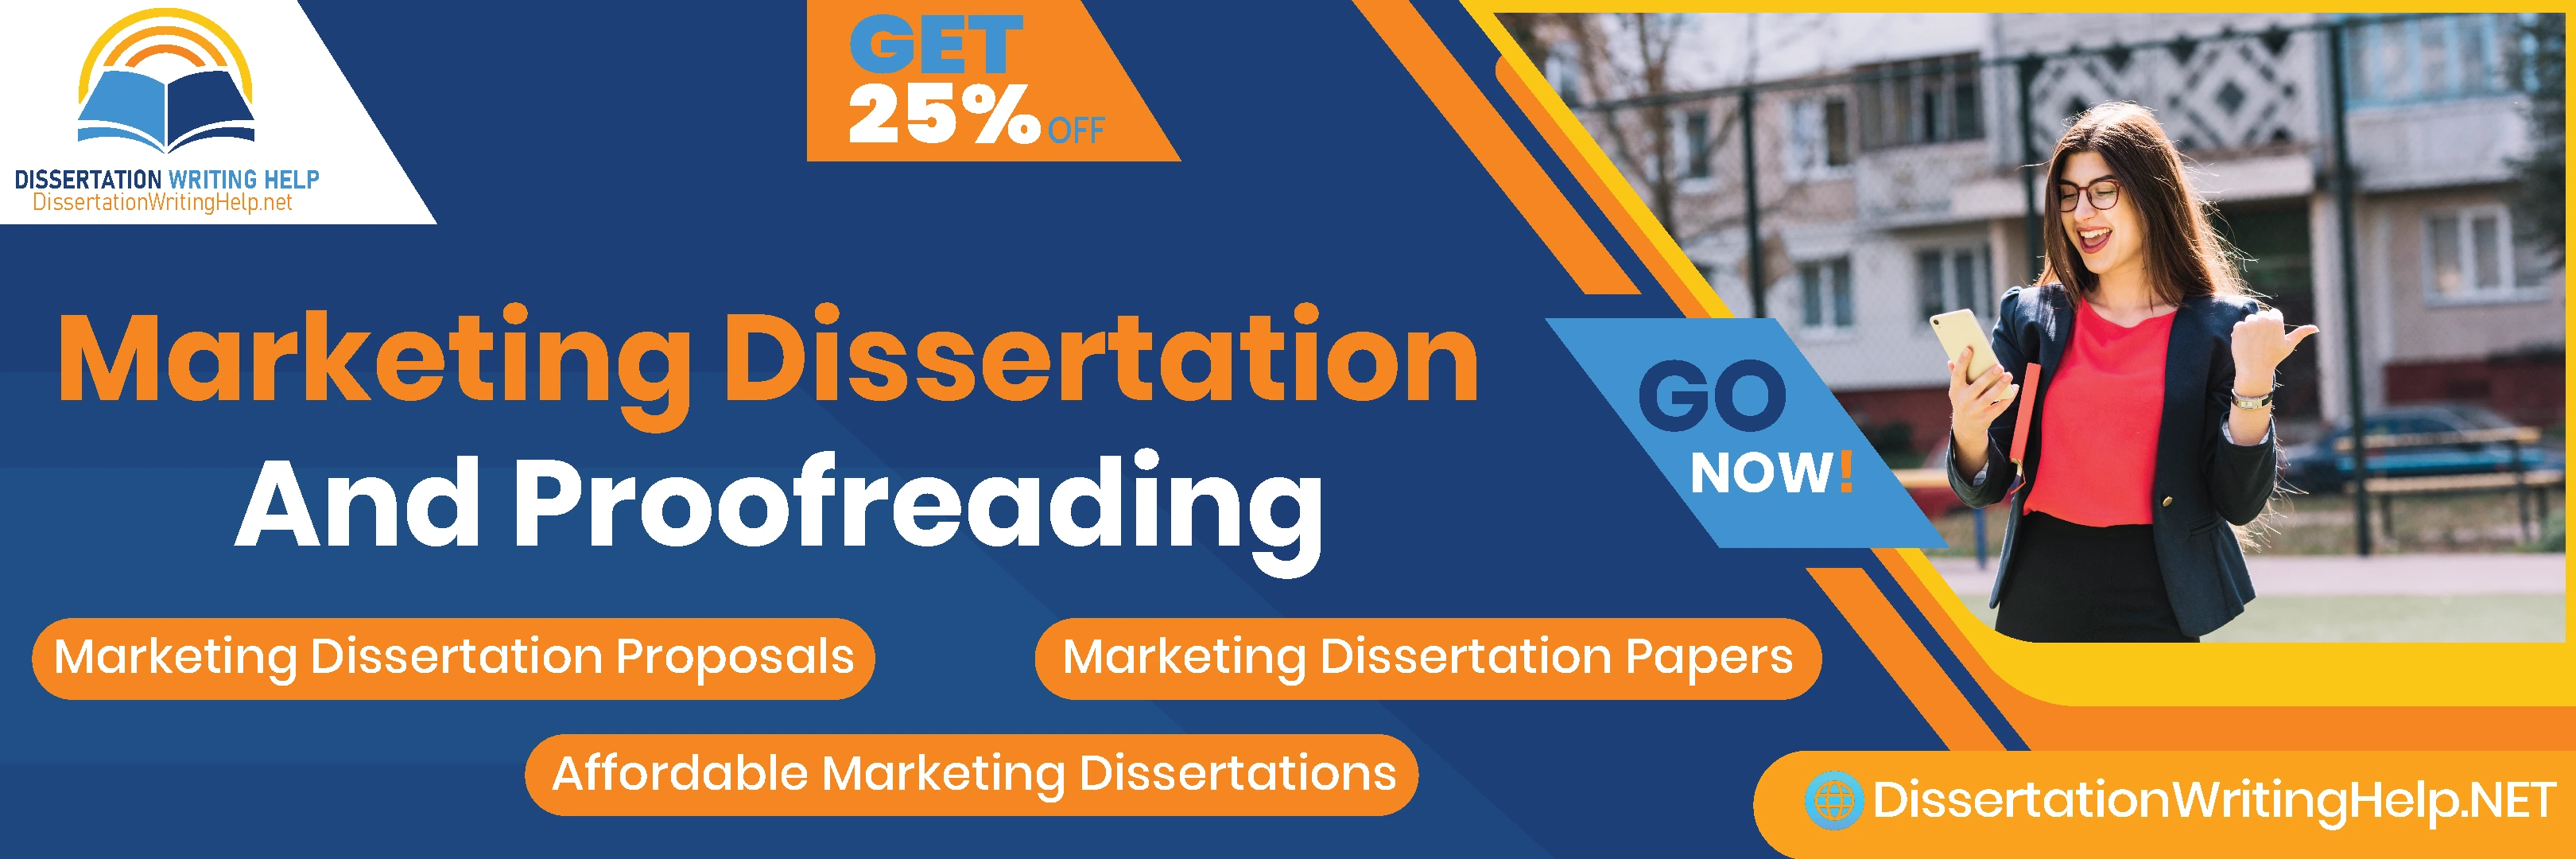 Marketing-Dissertation-And-Proofreading